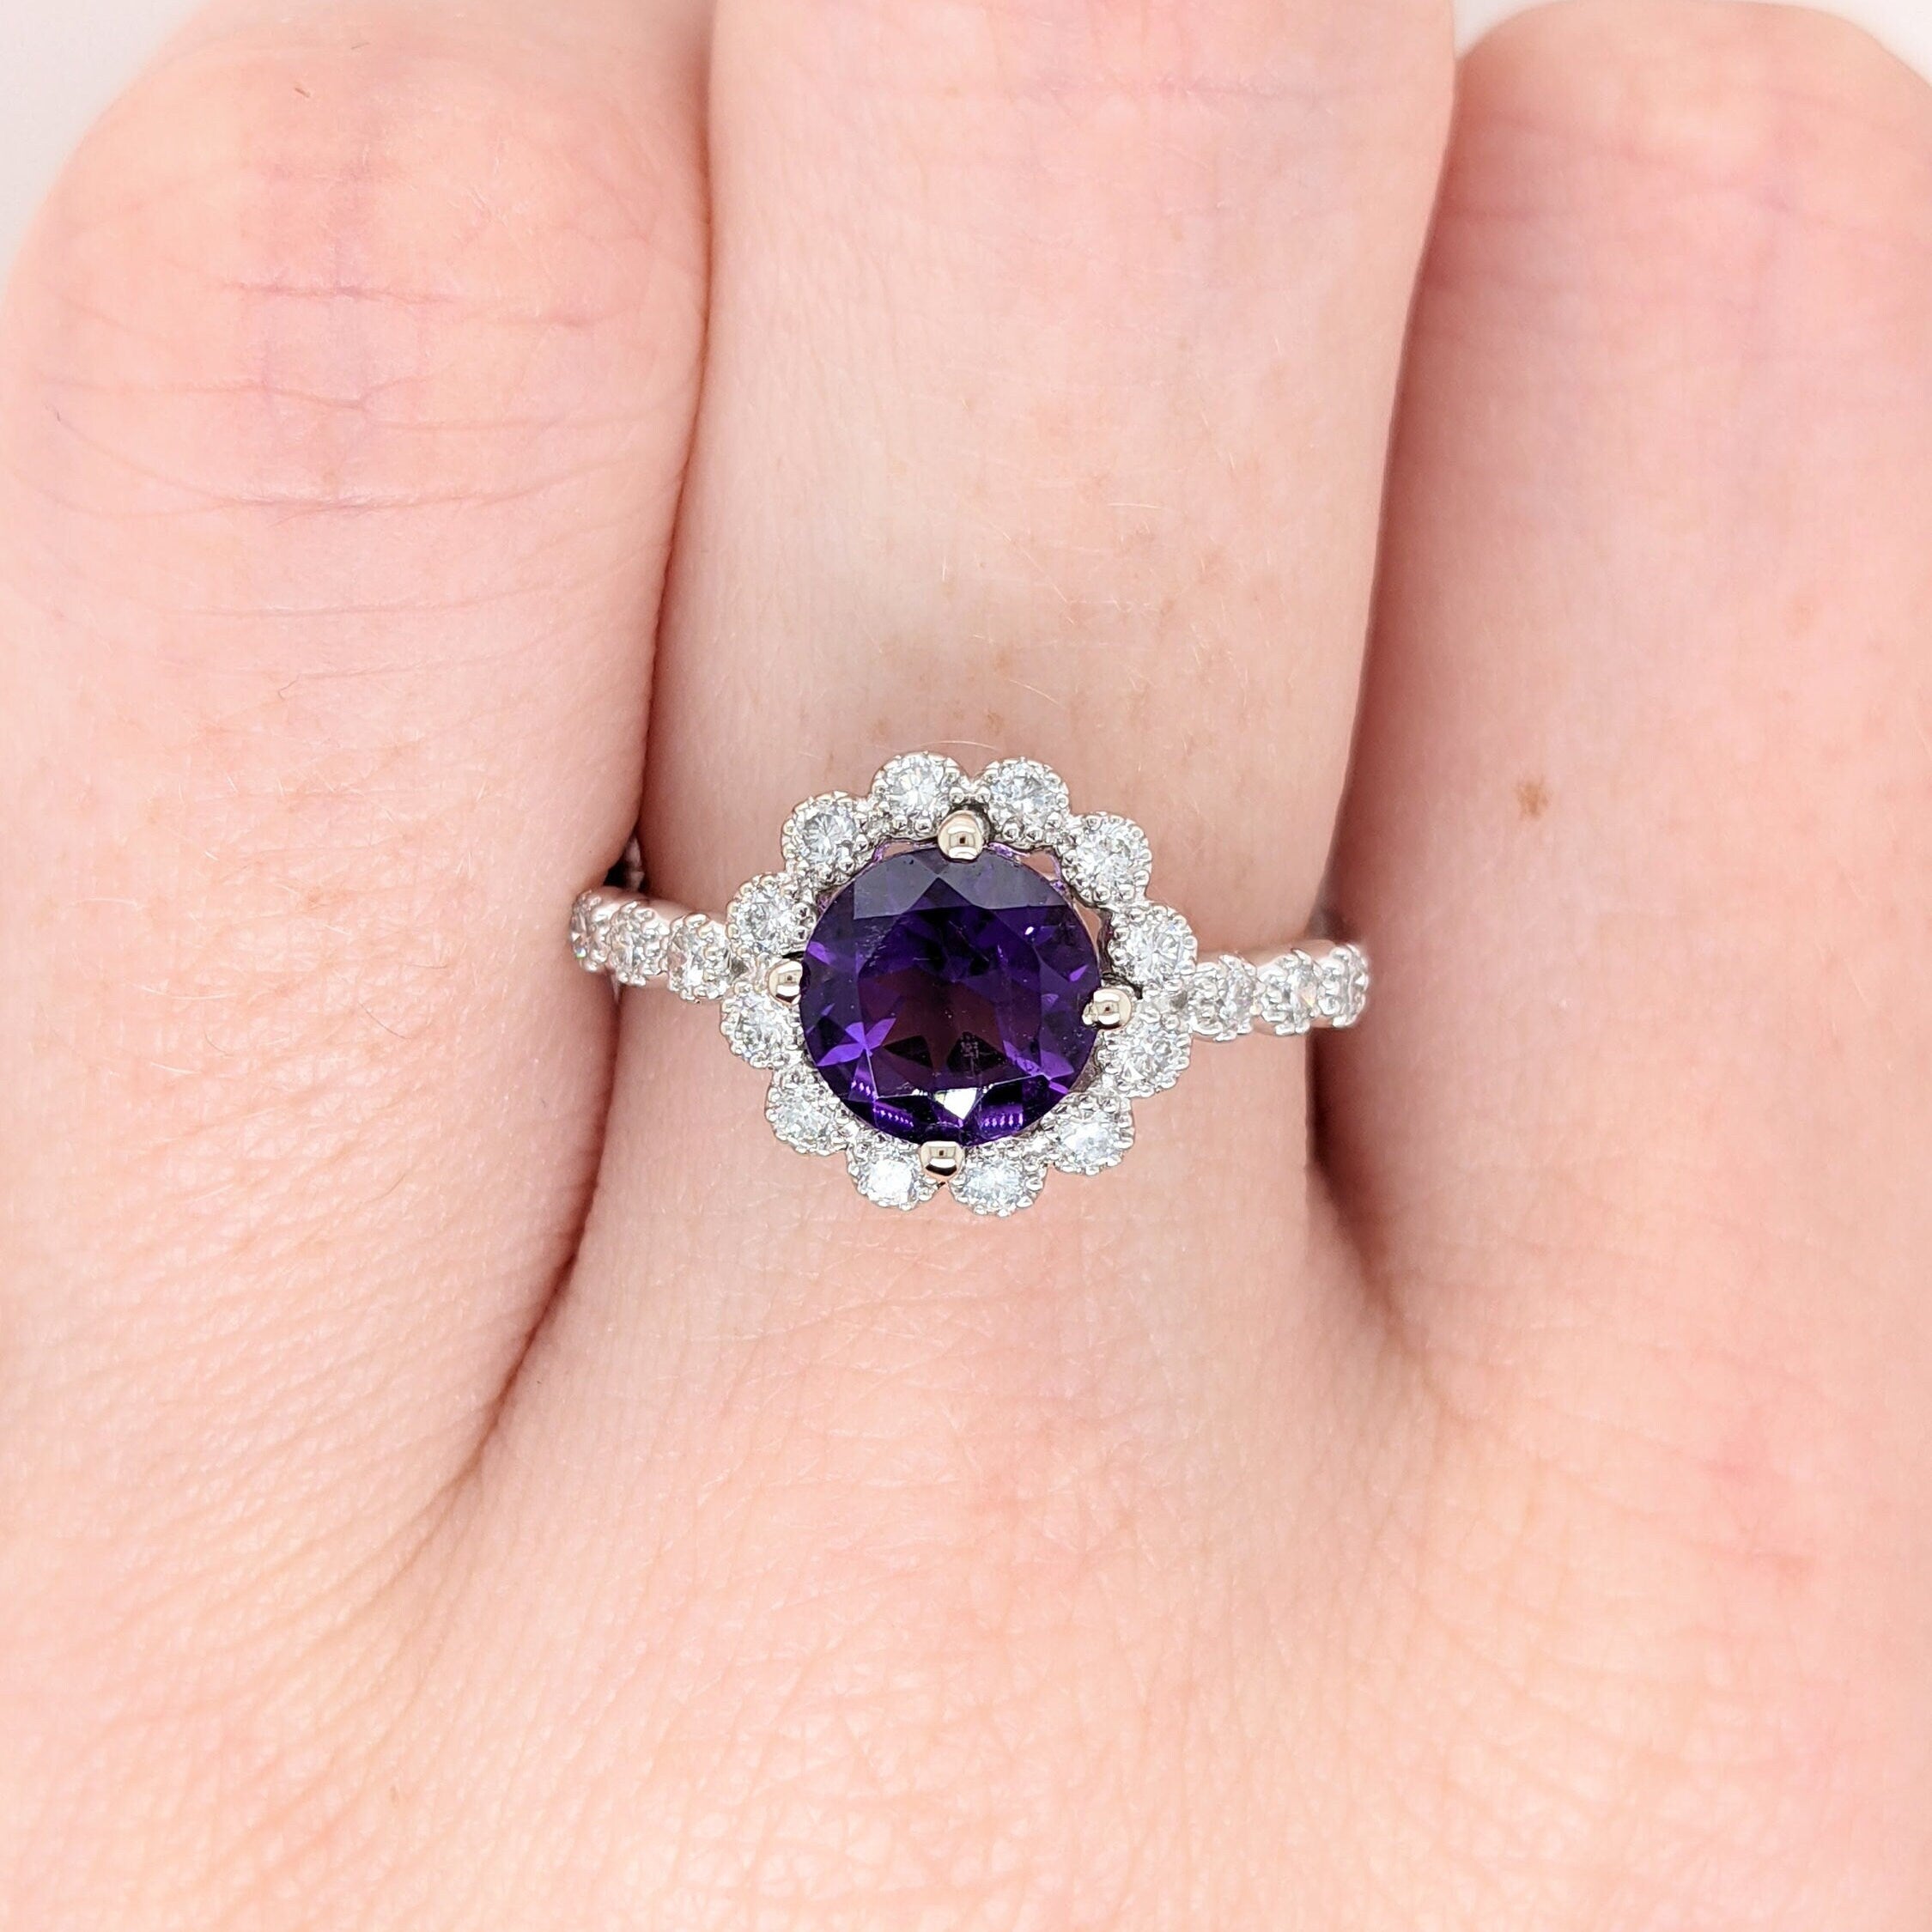 Beautiful Deep Purple Amethyst Ring in Solid 14k White Gold with Natural Diamond Accents | Round 7mm | February Birthstone | Engagement Ring